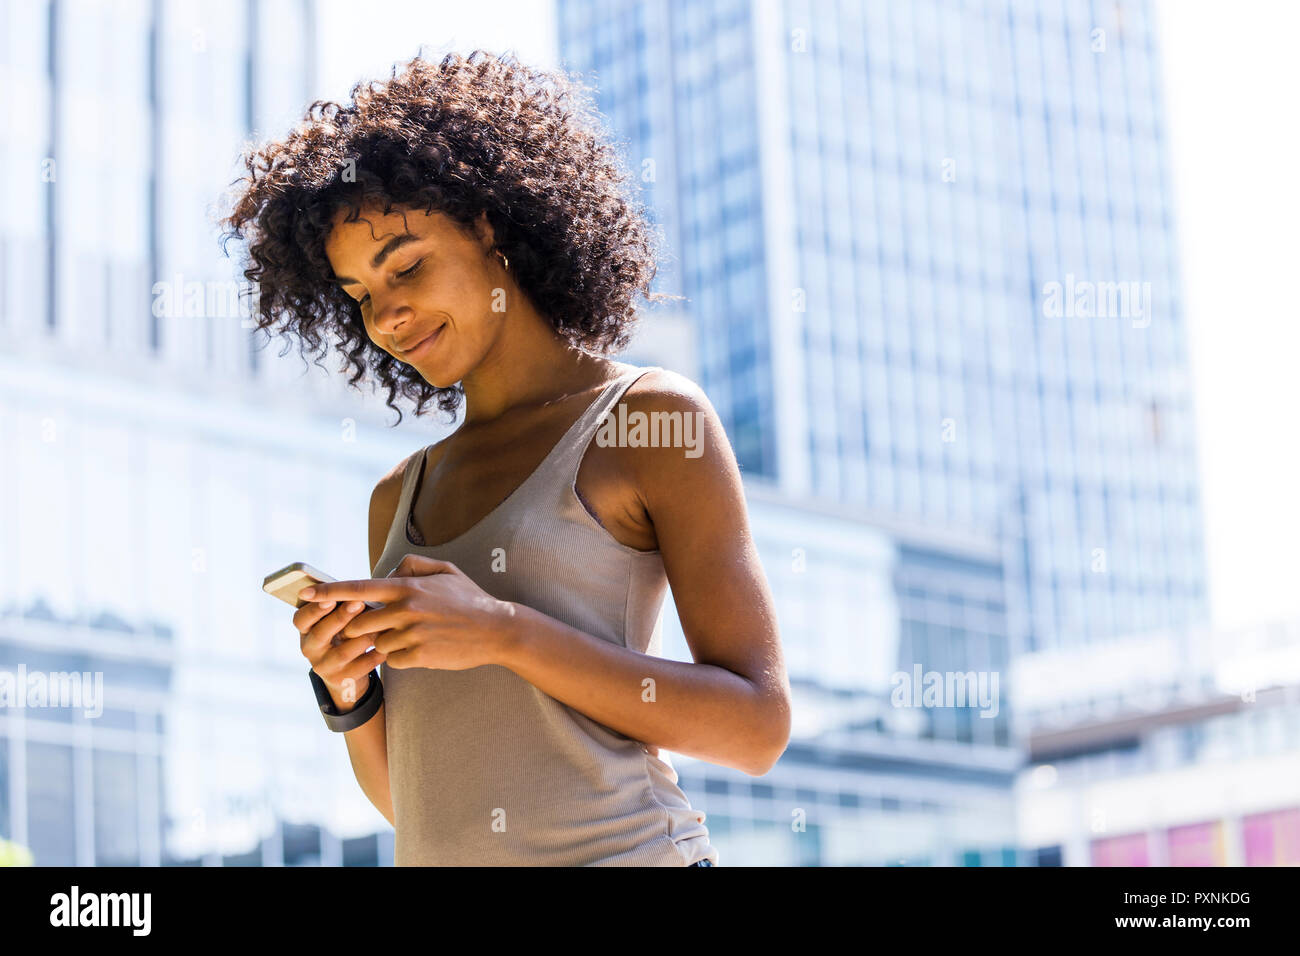 Germany, Frankfurt, smiling young woman with curly hair looking at cell phone in front of skyscrapers Stock Photo